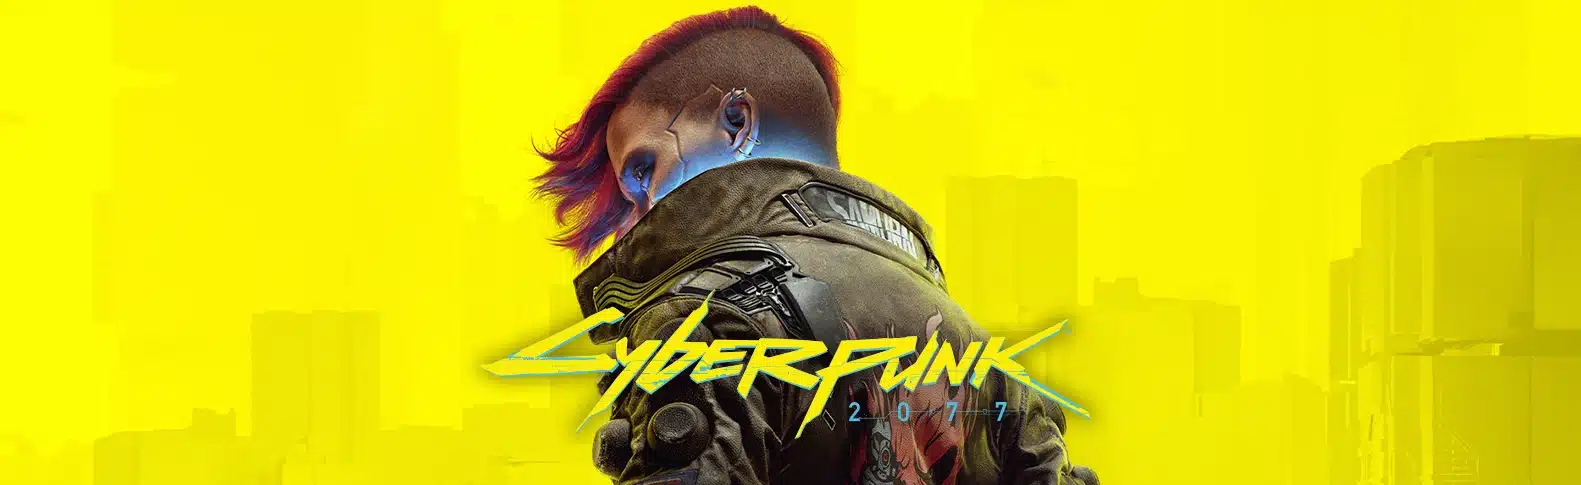 A cyberpunk character in a stylized leather jacket. The words Cyberpunk 2077 appear below the character